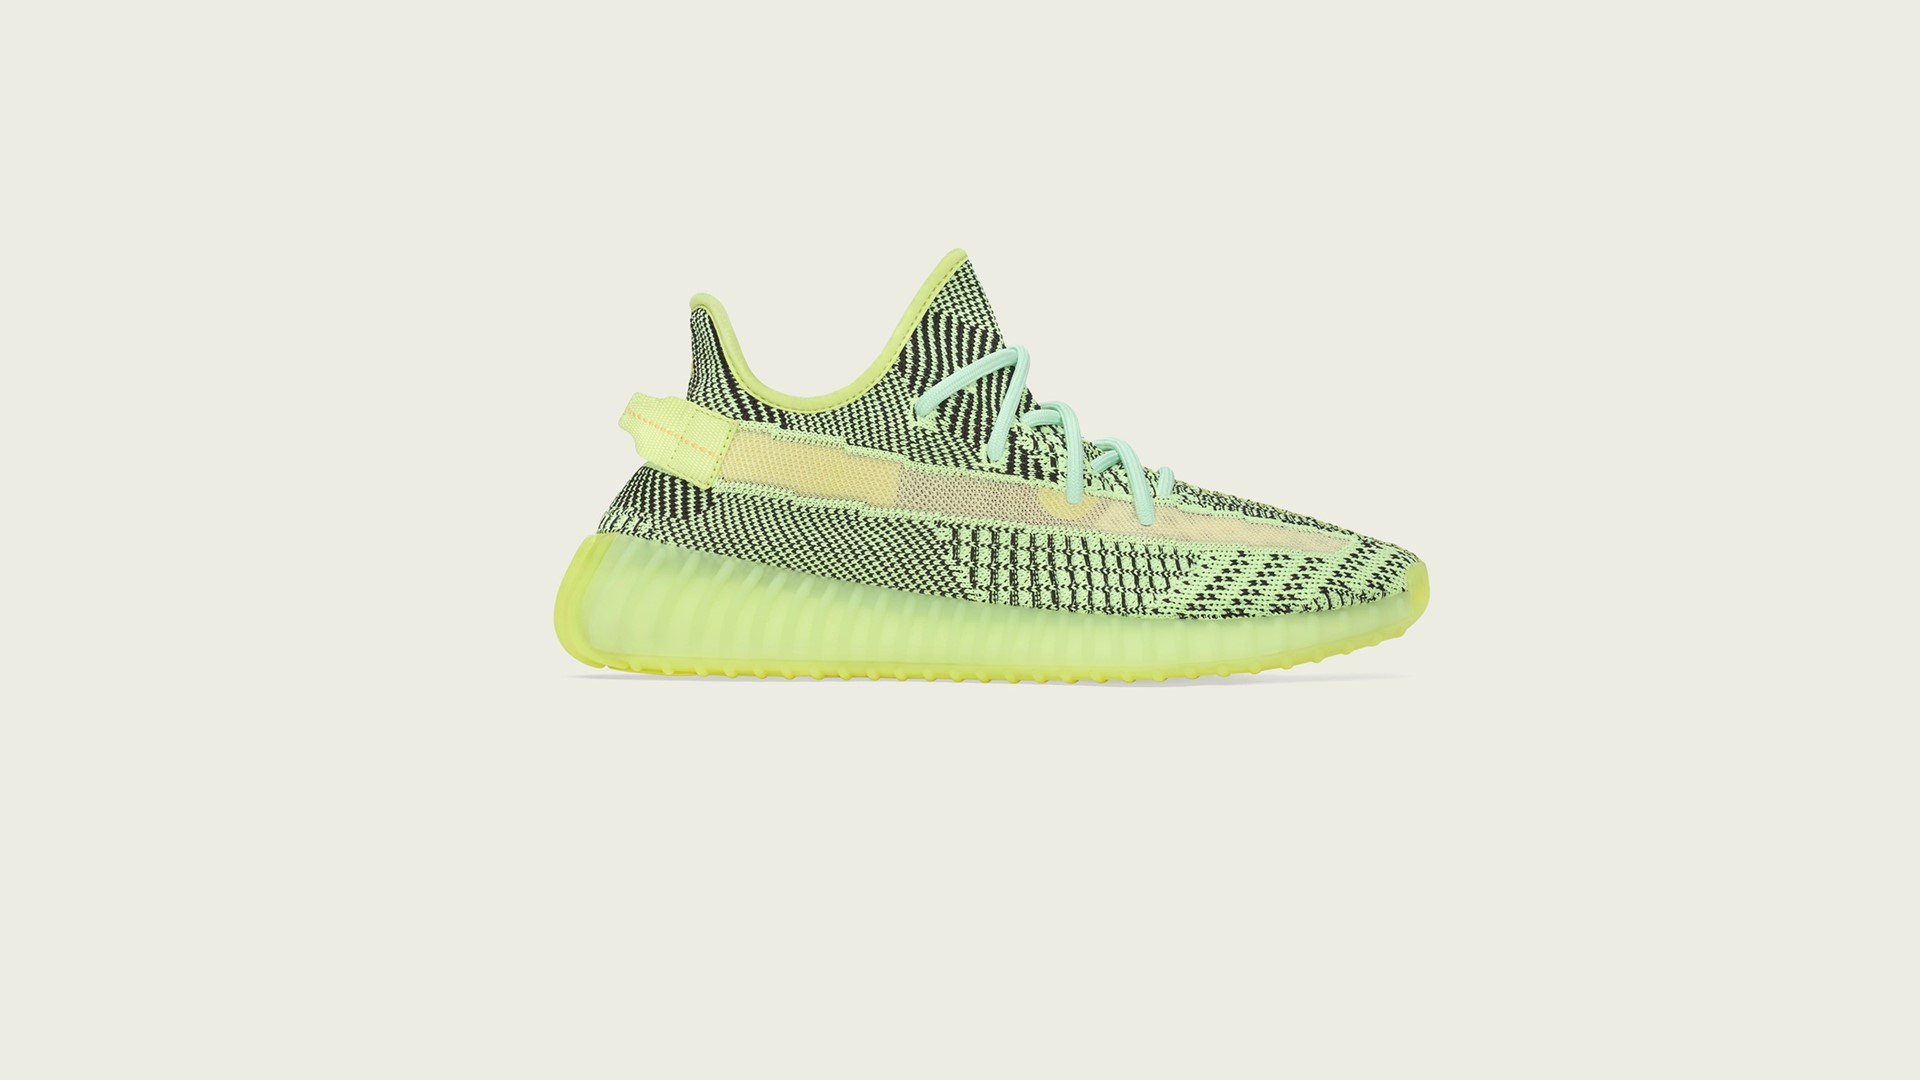 yeezy shoes 2019 release